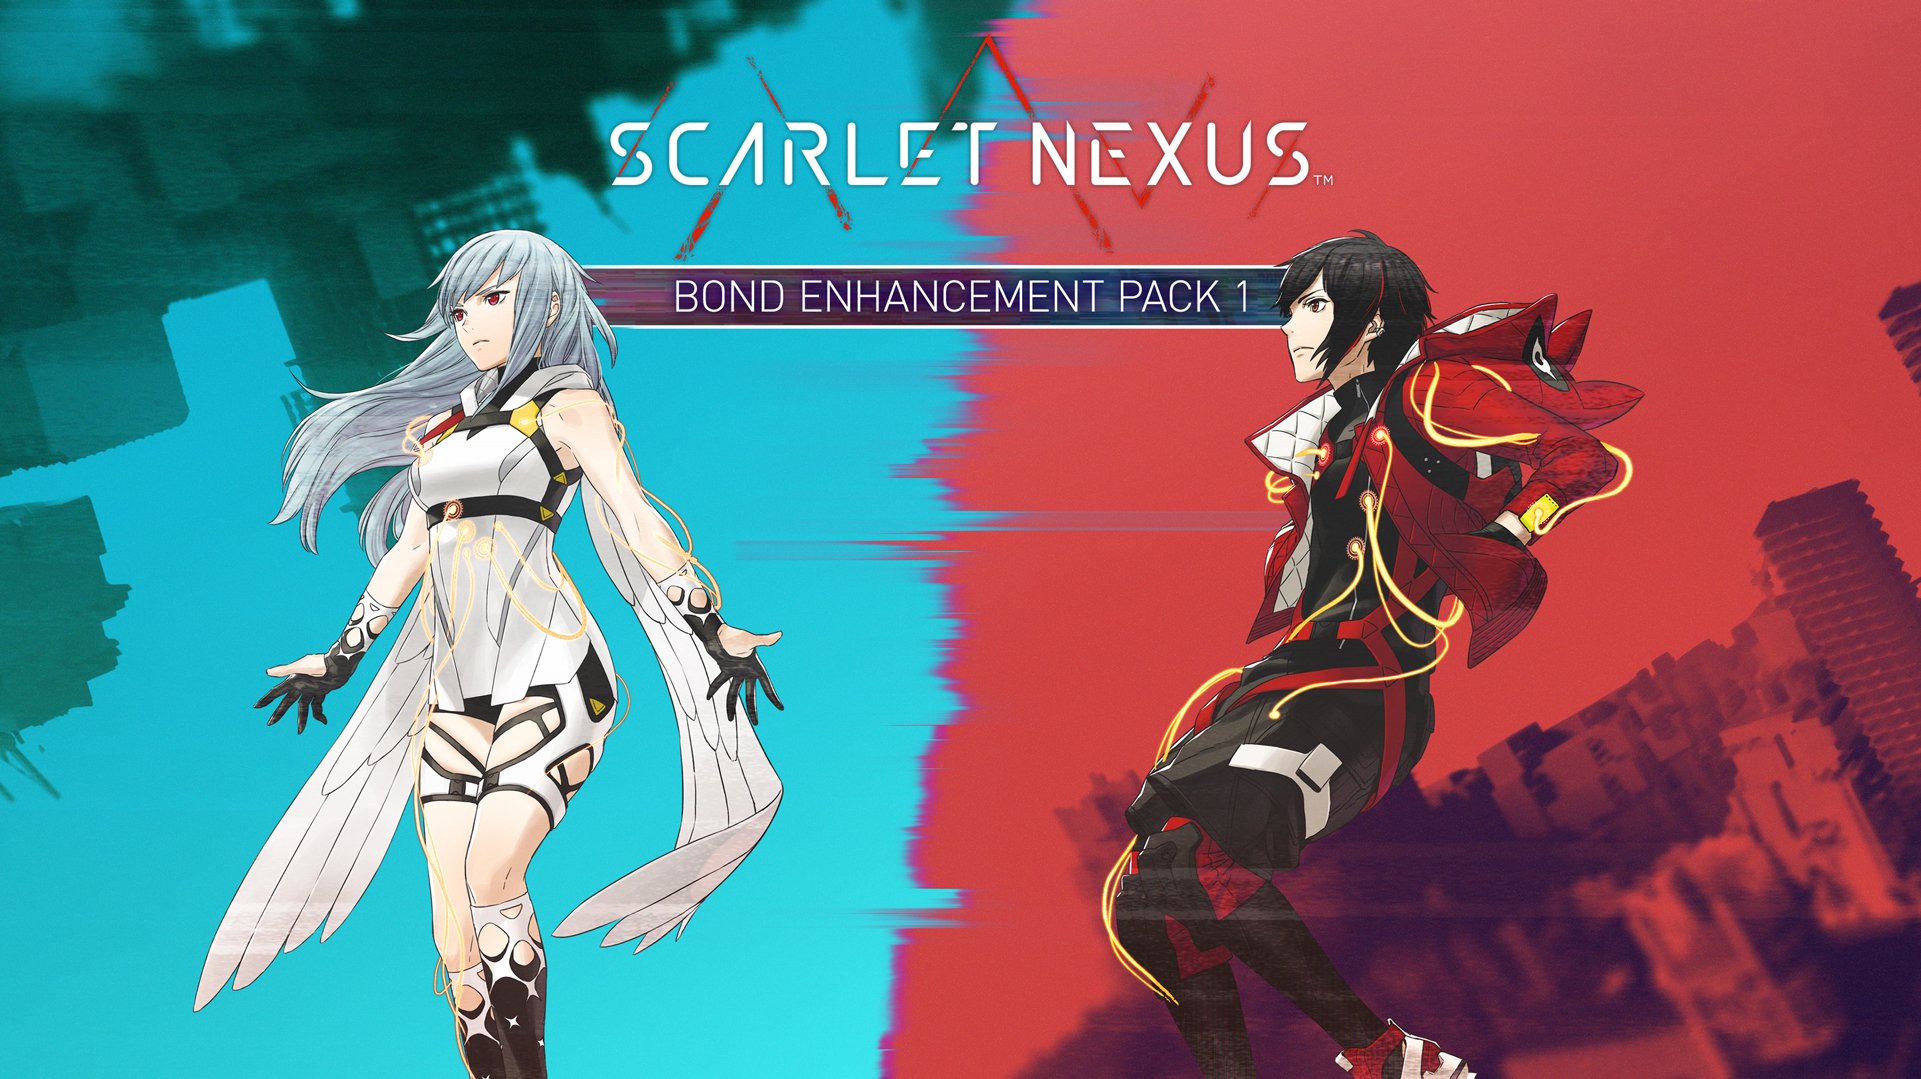 Pack 1 and Update 1.04 for Scarlet Nexus Bond Enhancement Pack